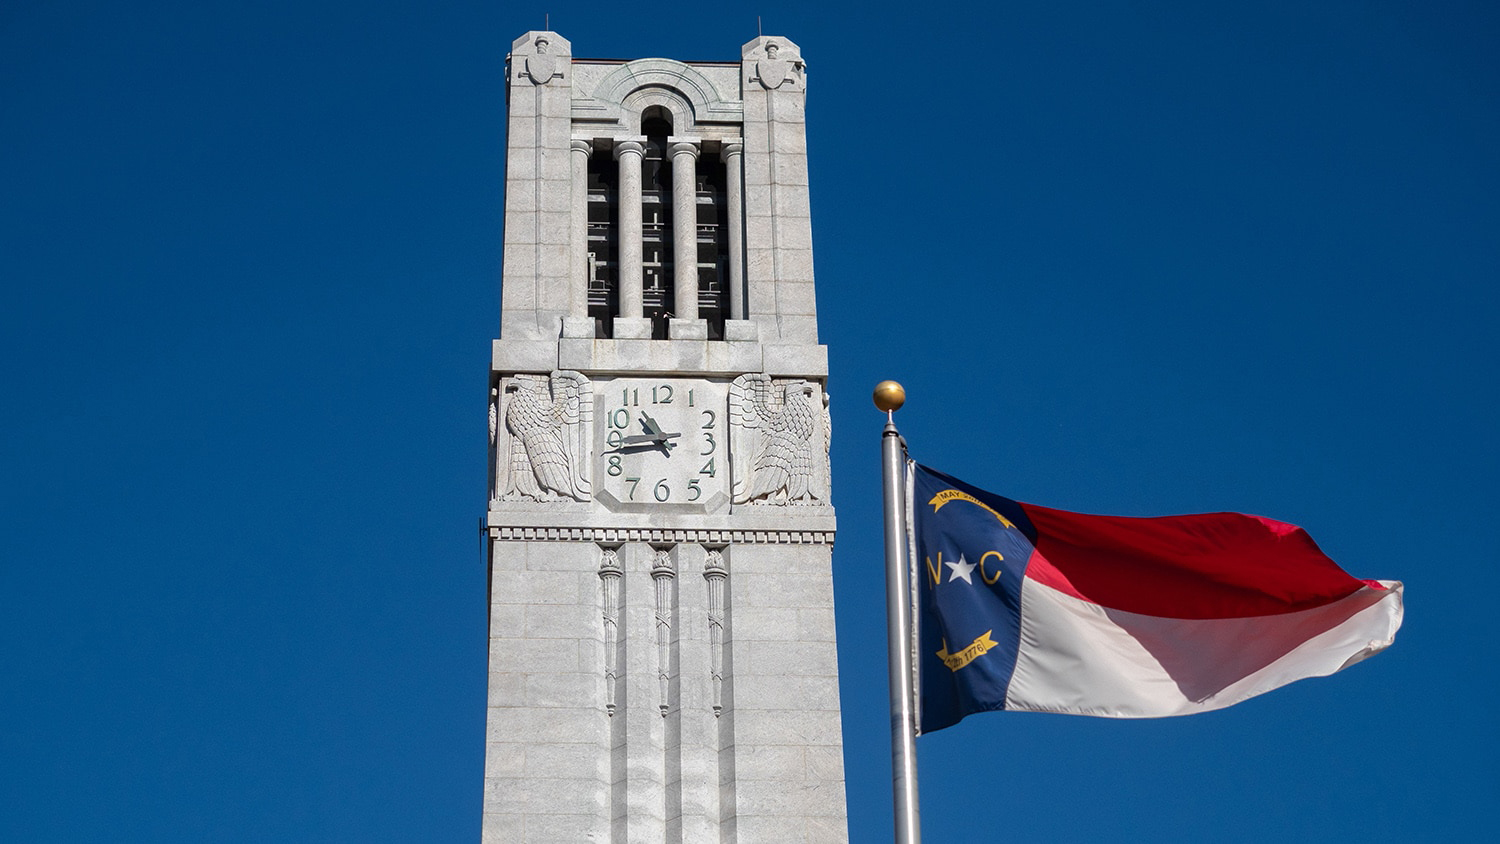 NC flag in front of the Belltower